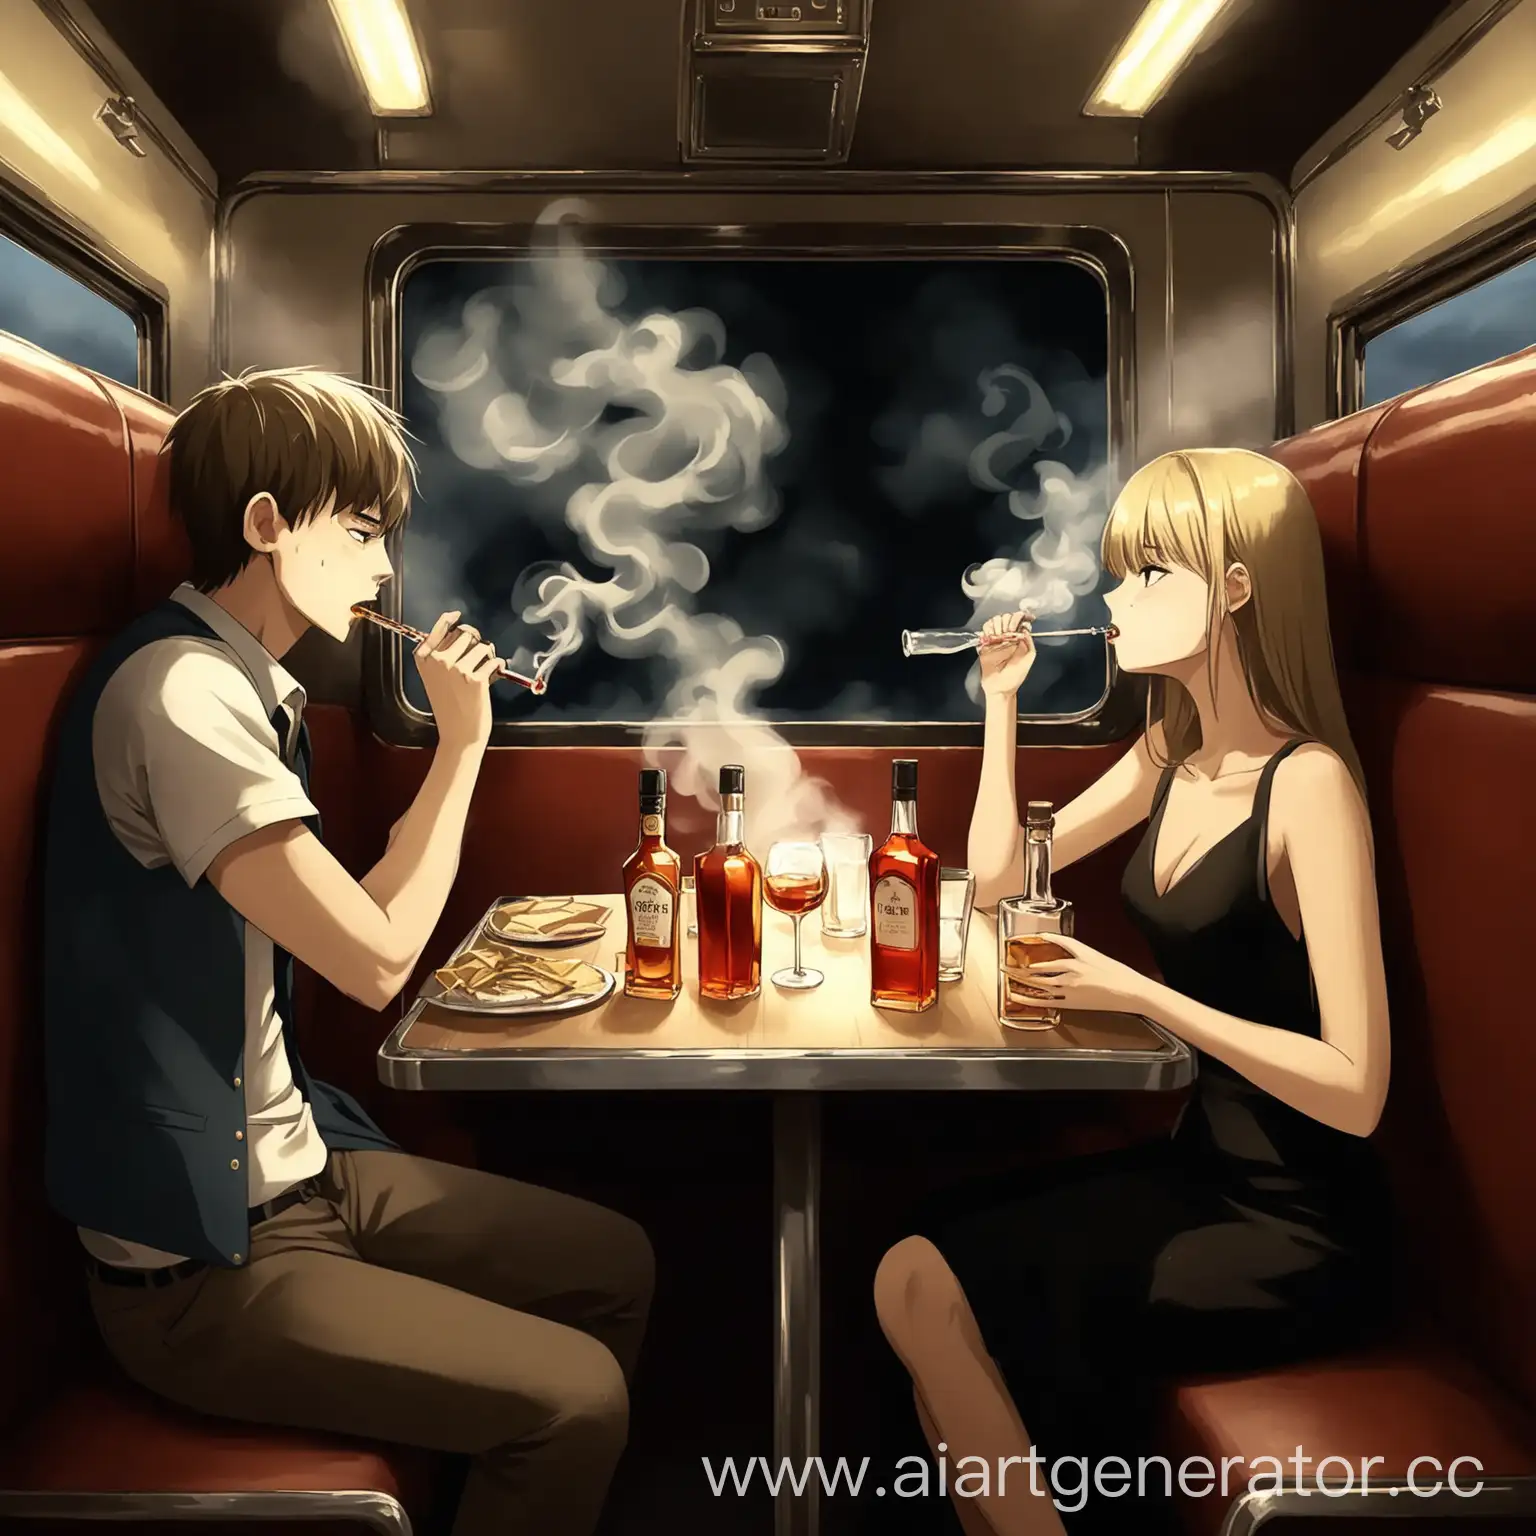 Children-Riding-in-Train-Compartment-Amidst-Smoking-Alcohol